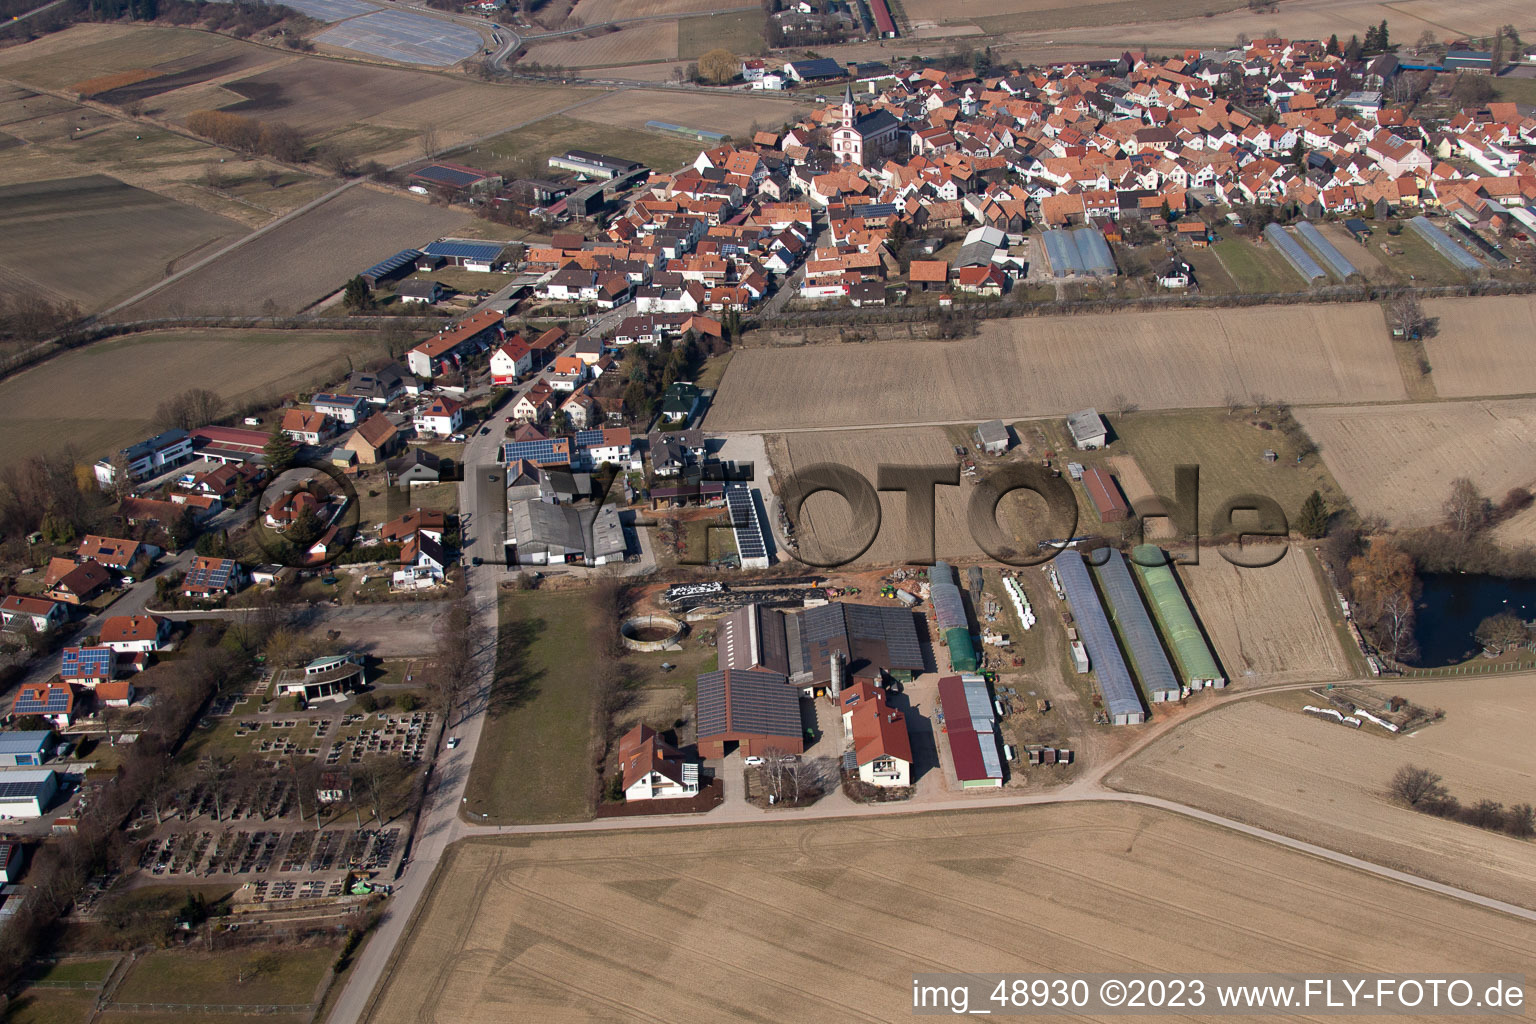 Schmiedhof in Neupotz in the state Rhineland-Palatinate, Germany seen from above